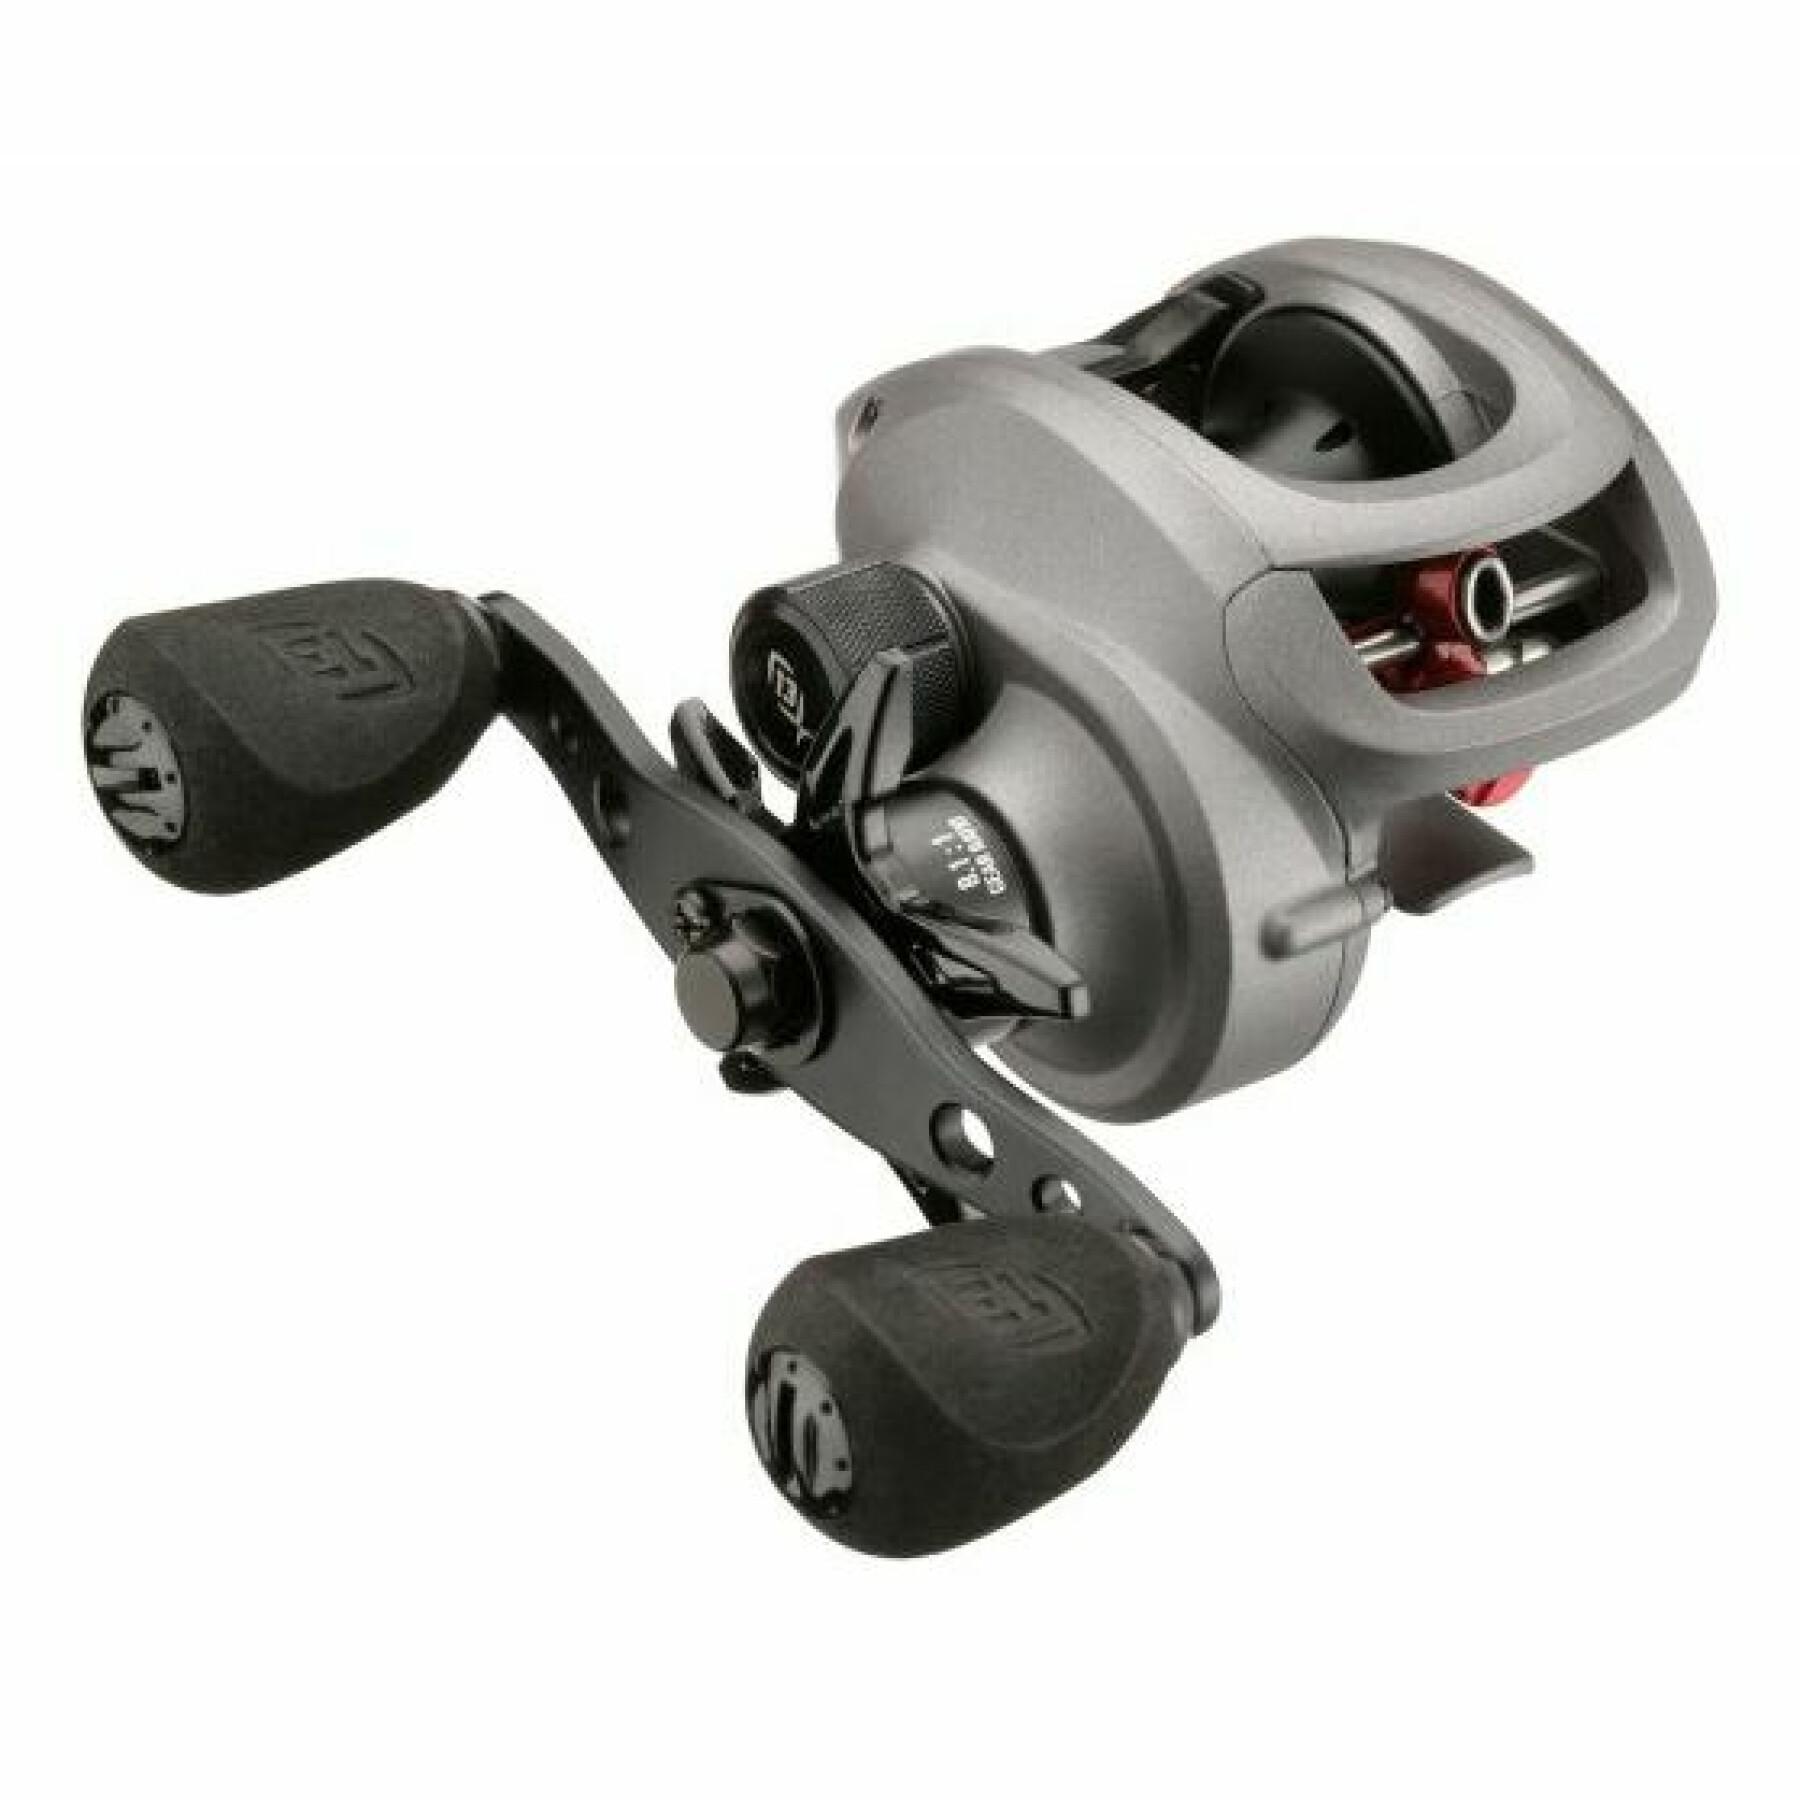 Rolle 13 Fishing Inception BC 6.6:1 rh